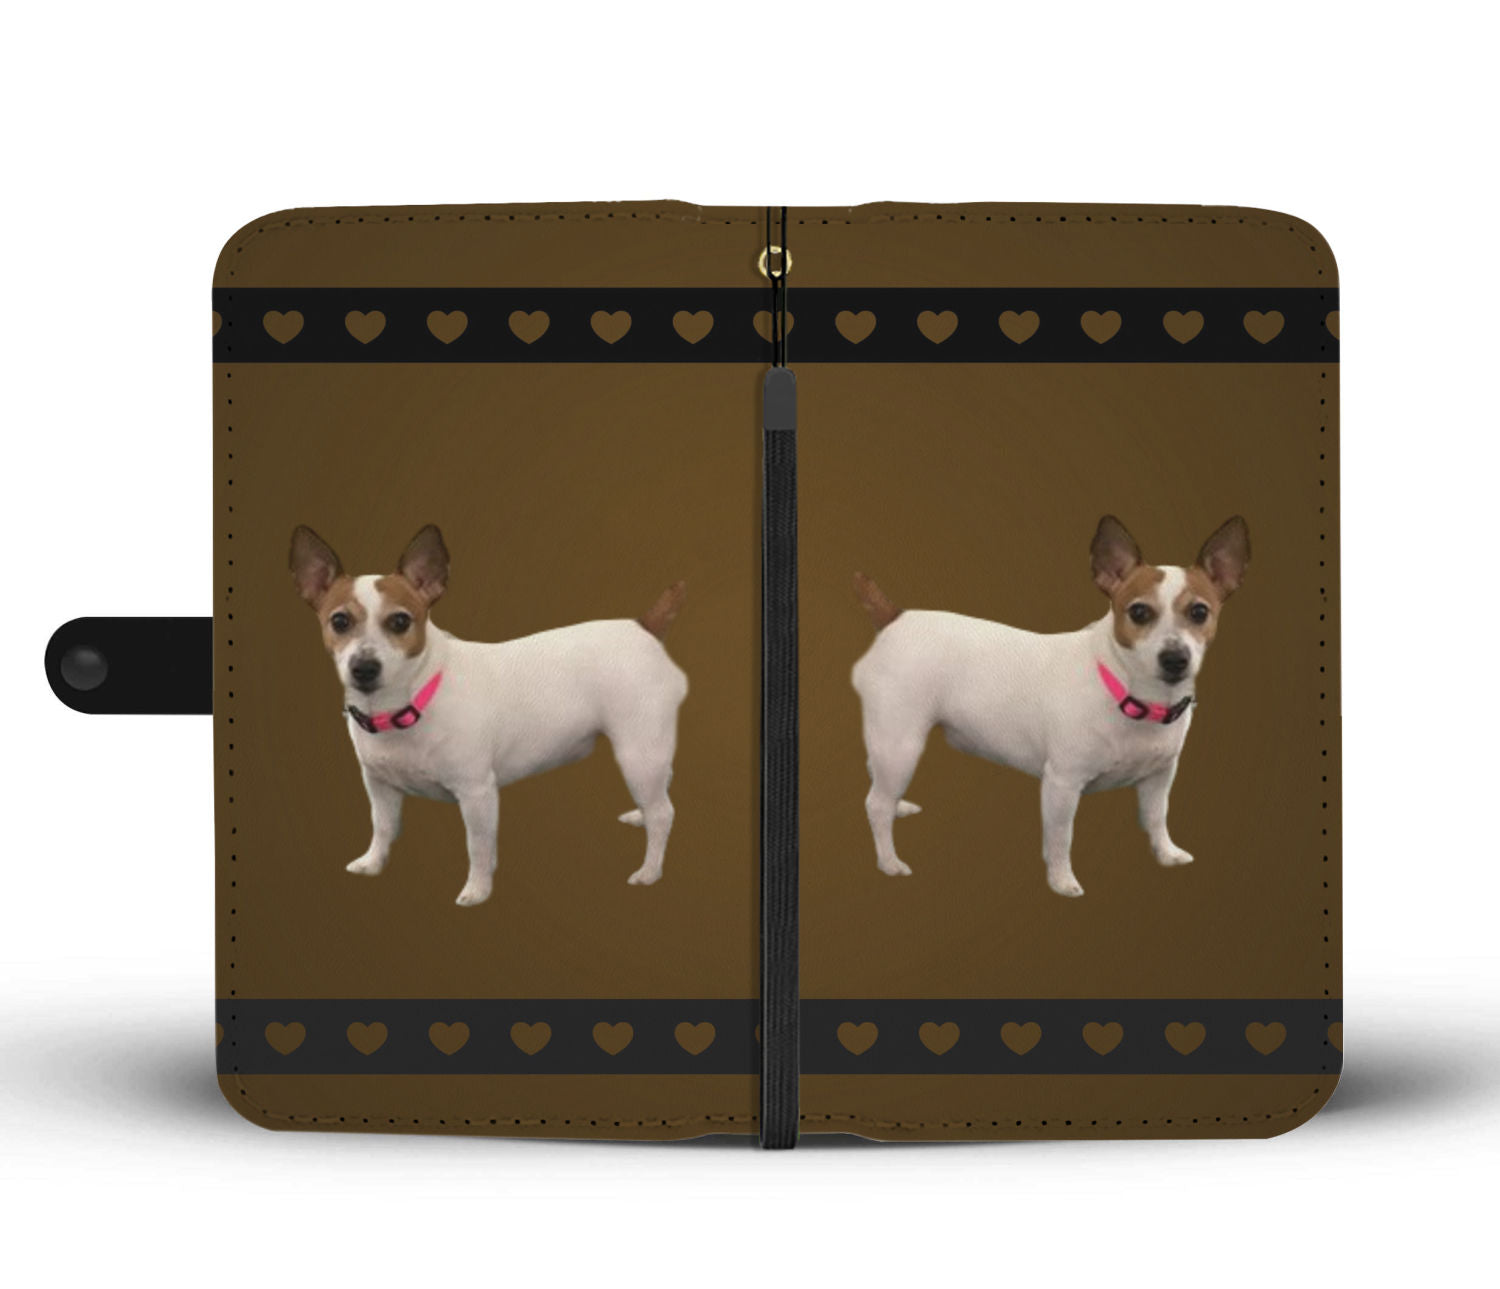 Jack Russell Phone Case Wallet